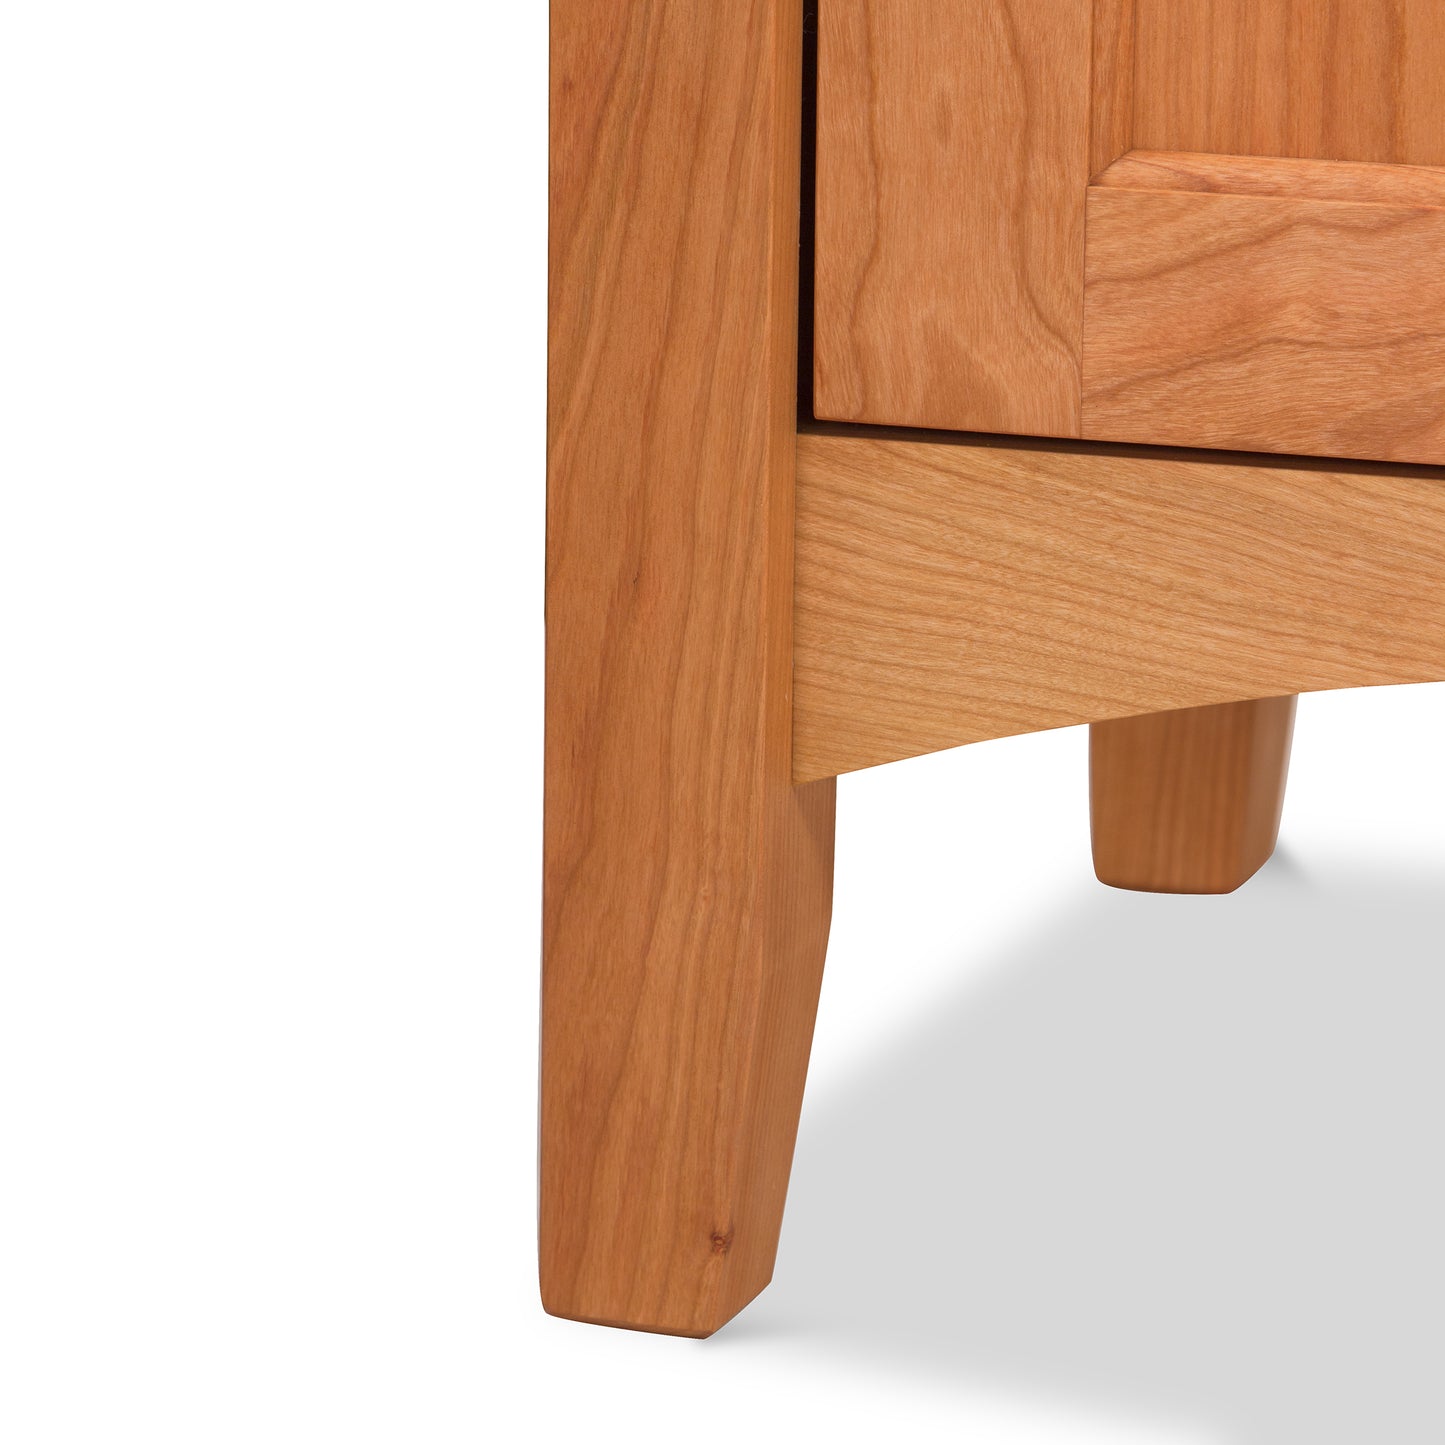 A close up of a handmade Maple Corner Woodworks American Shaker 3-Drawer Nightstand, showcasing exquisite Vermont craftsmanship.